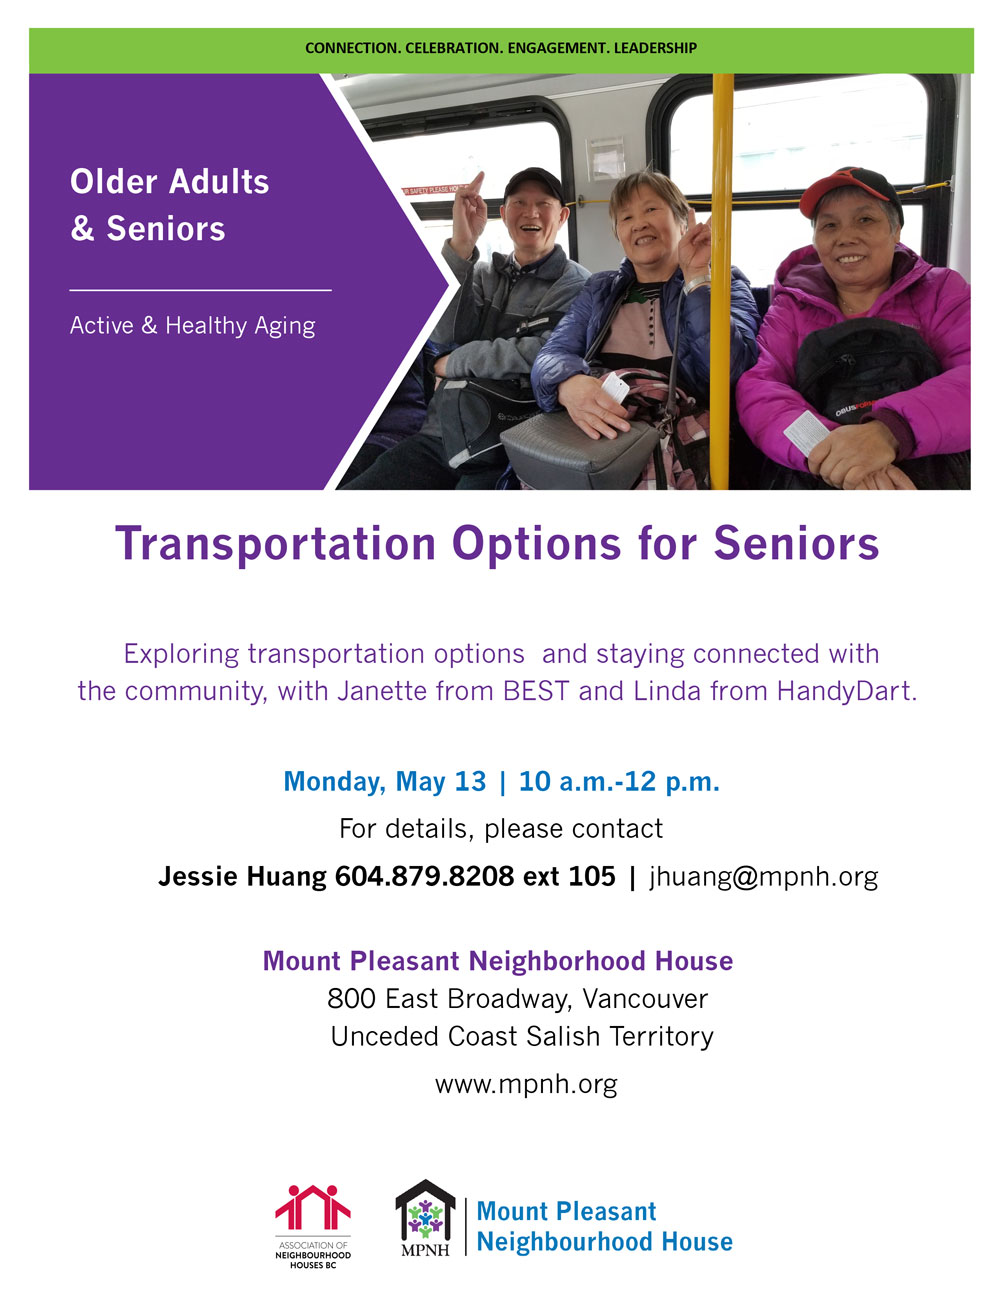 An image of the poster with event details, featuring a photo of seniors riding the bus together and smiling.